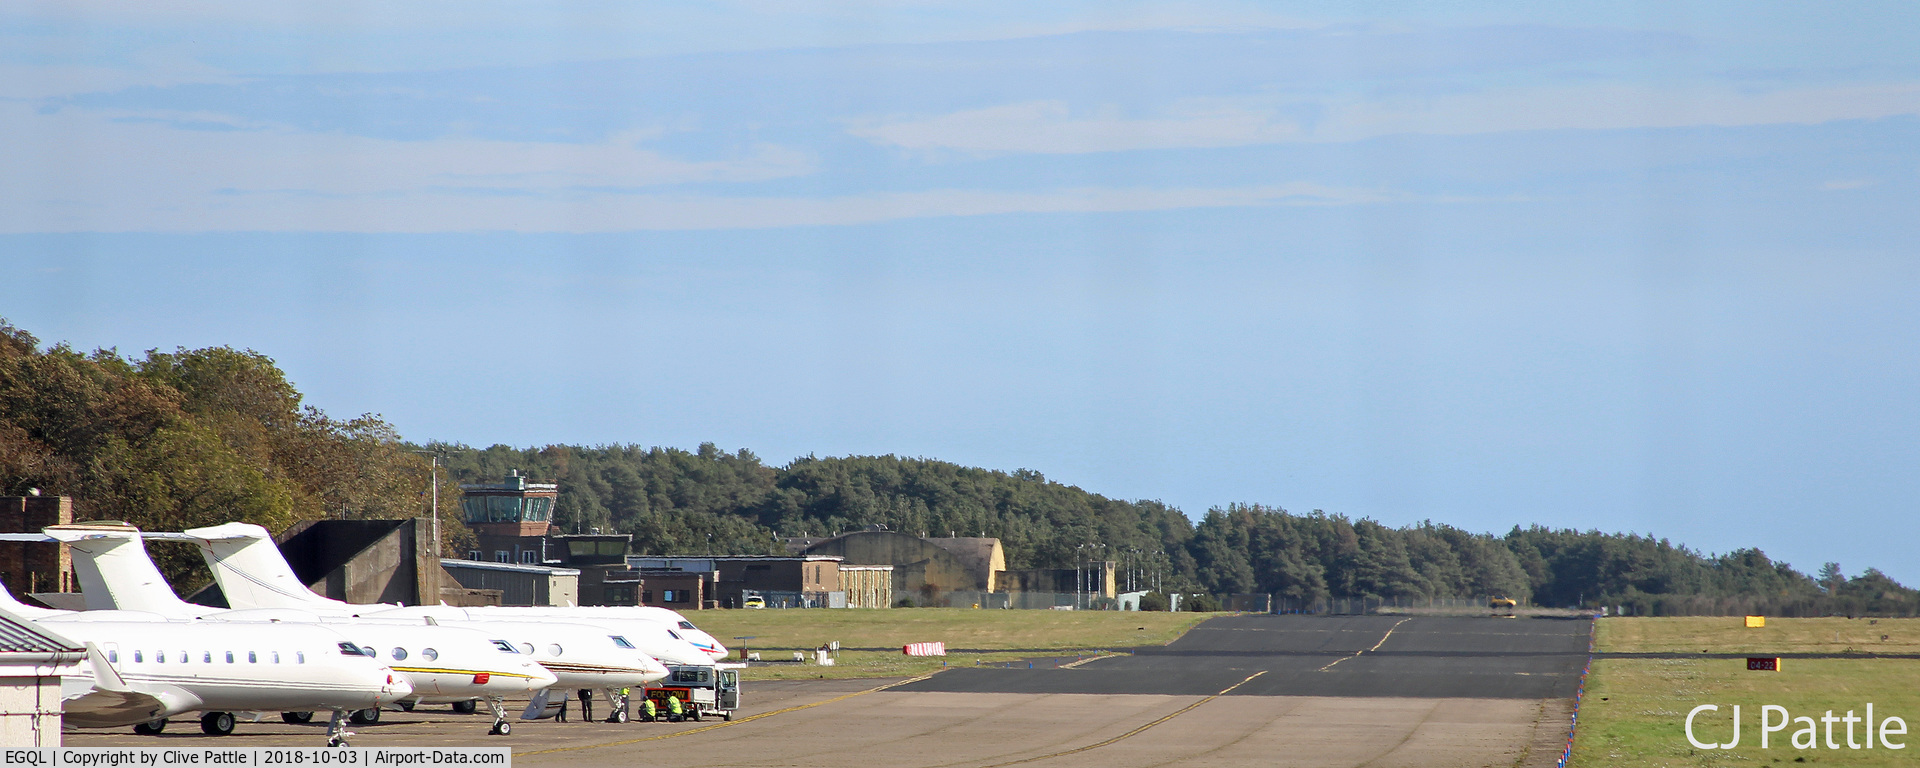 RAF Leuchars Airport, Leuchars, Scotland United Kingdom (EGQL) - A view of the north taxiway with line-up of bizjets at Leuchars Station for the Annual Alfred Dunhill Links Golf Championships being held at the nearby 'Old Course' at St Andrews.